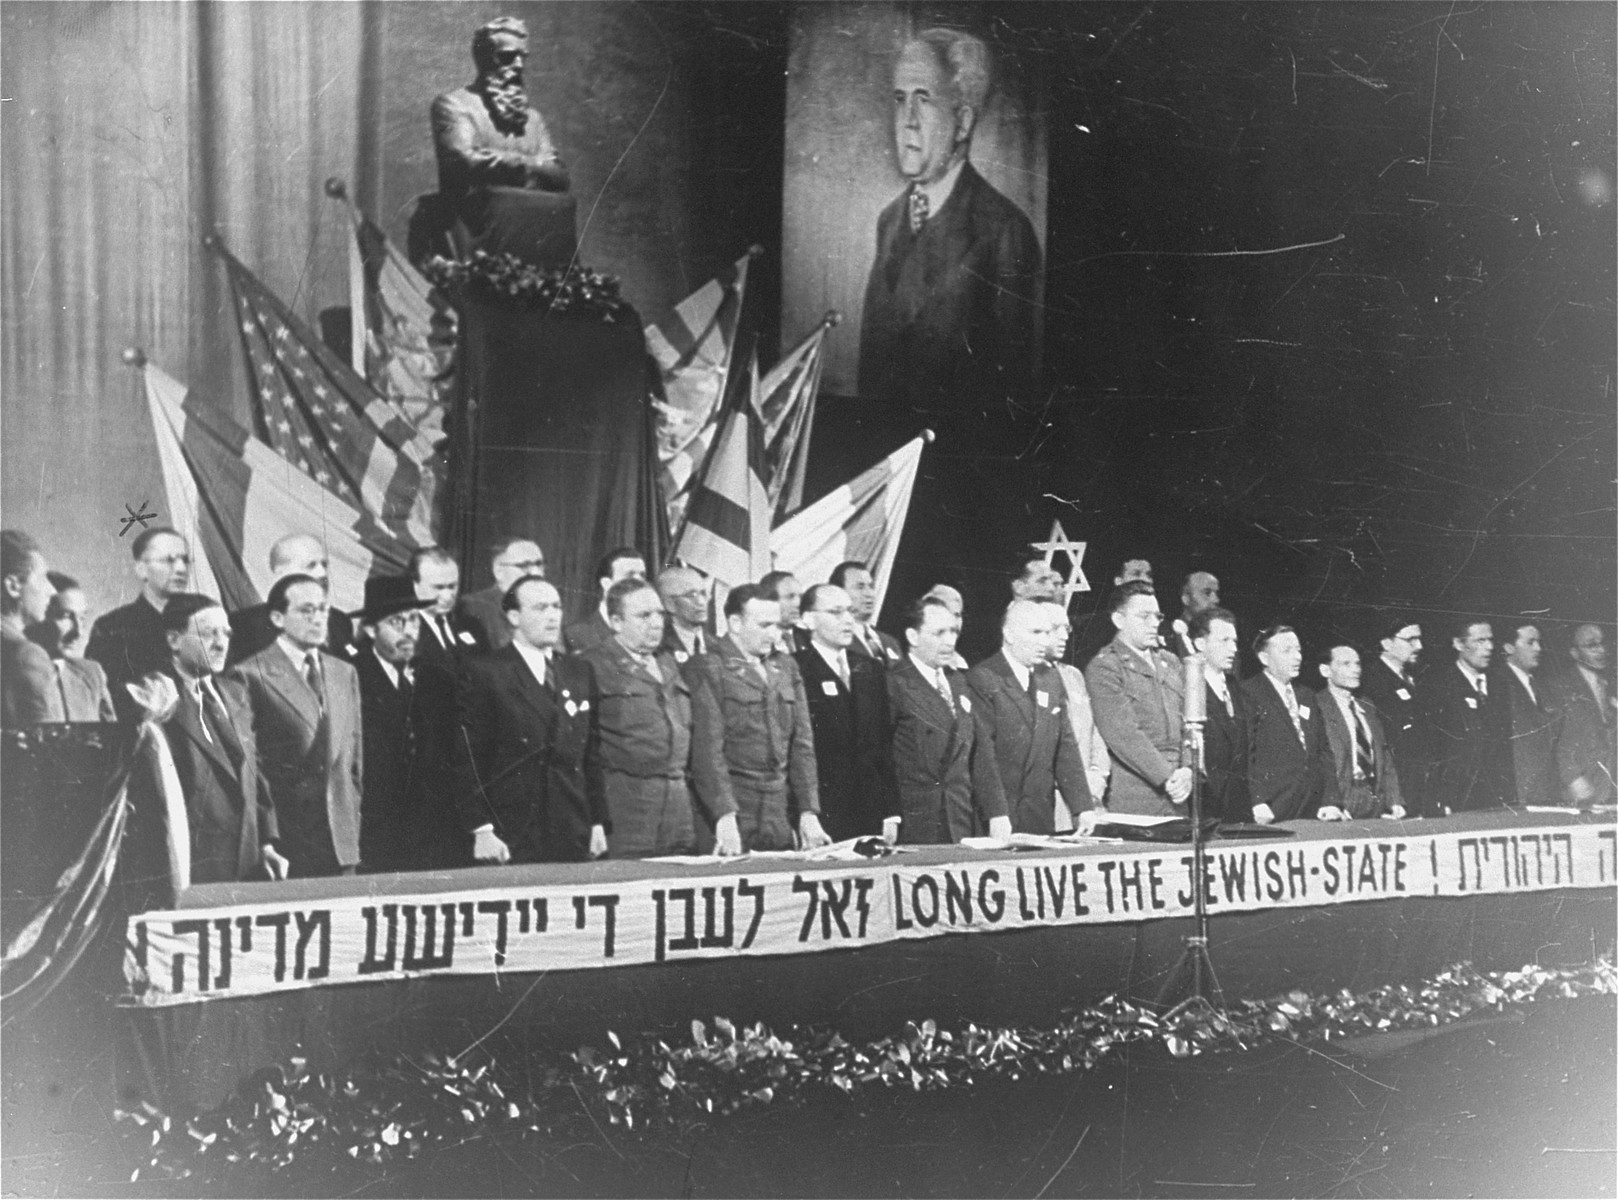 A meeting of the Central Committee of Liberated Jews in the US Zone of Germany celebrating the establishment of the State of Israel.